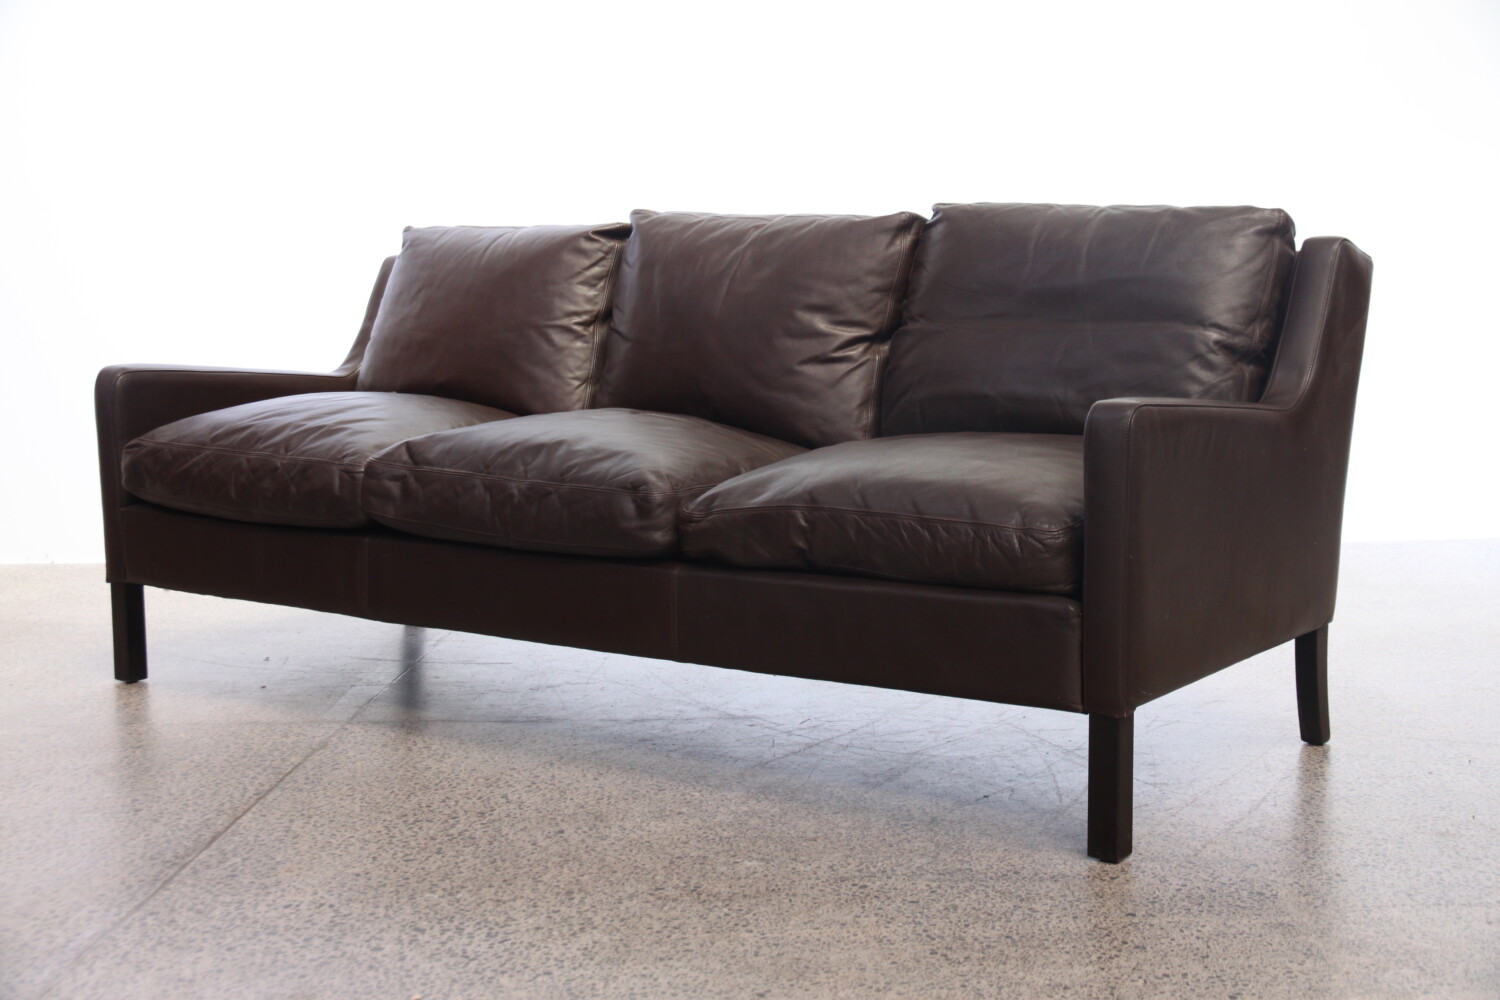 Pair Of Brown Leather Sofa